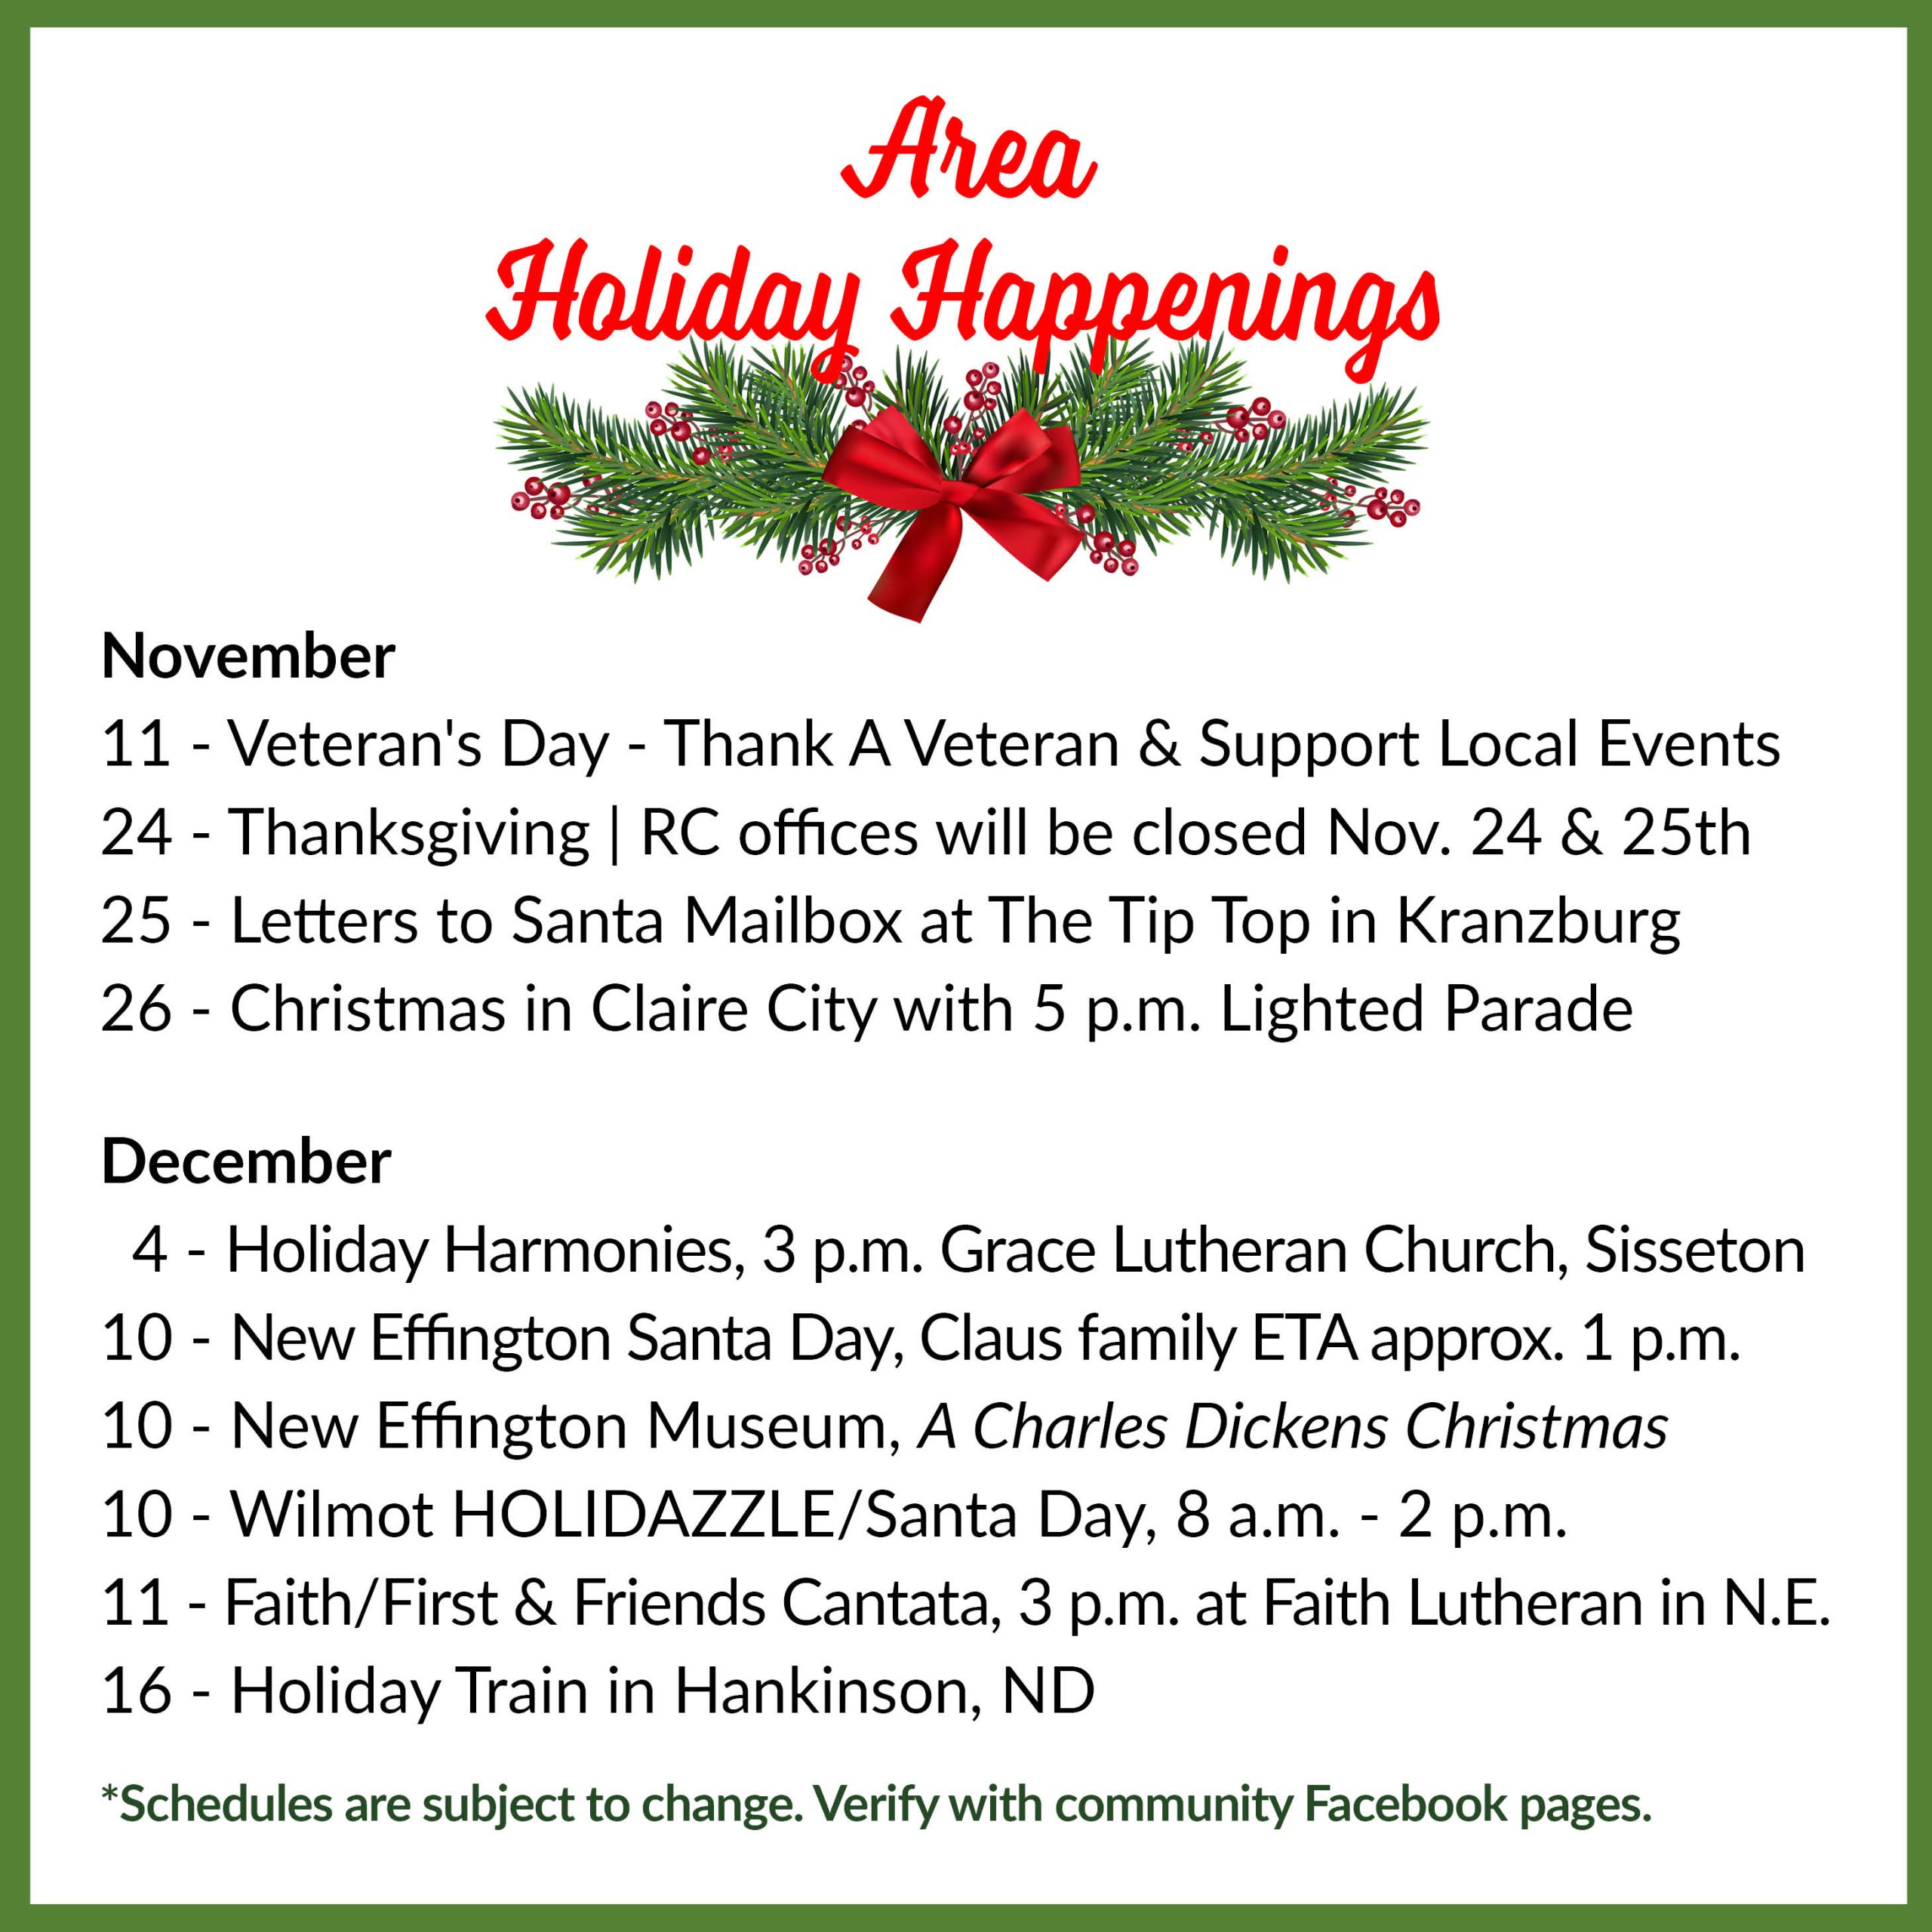 Area Holiday Happenings